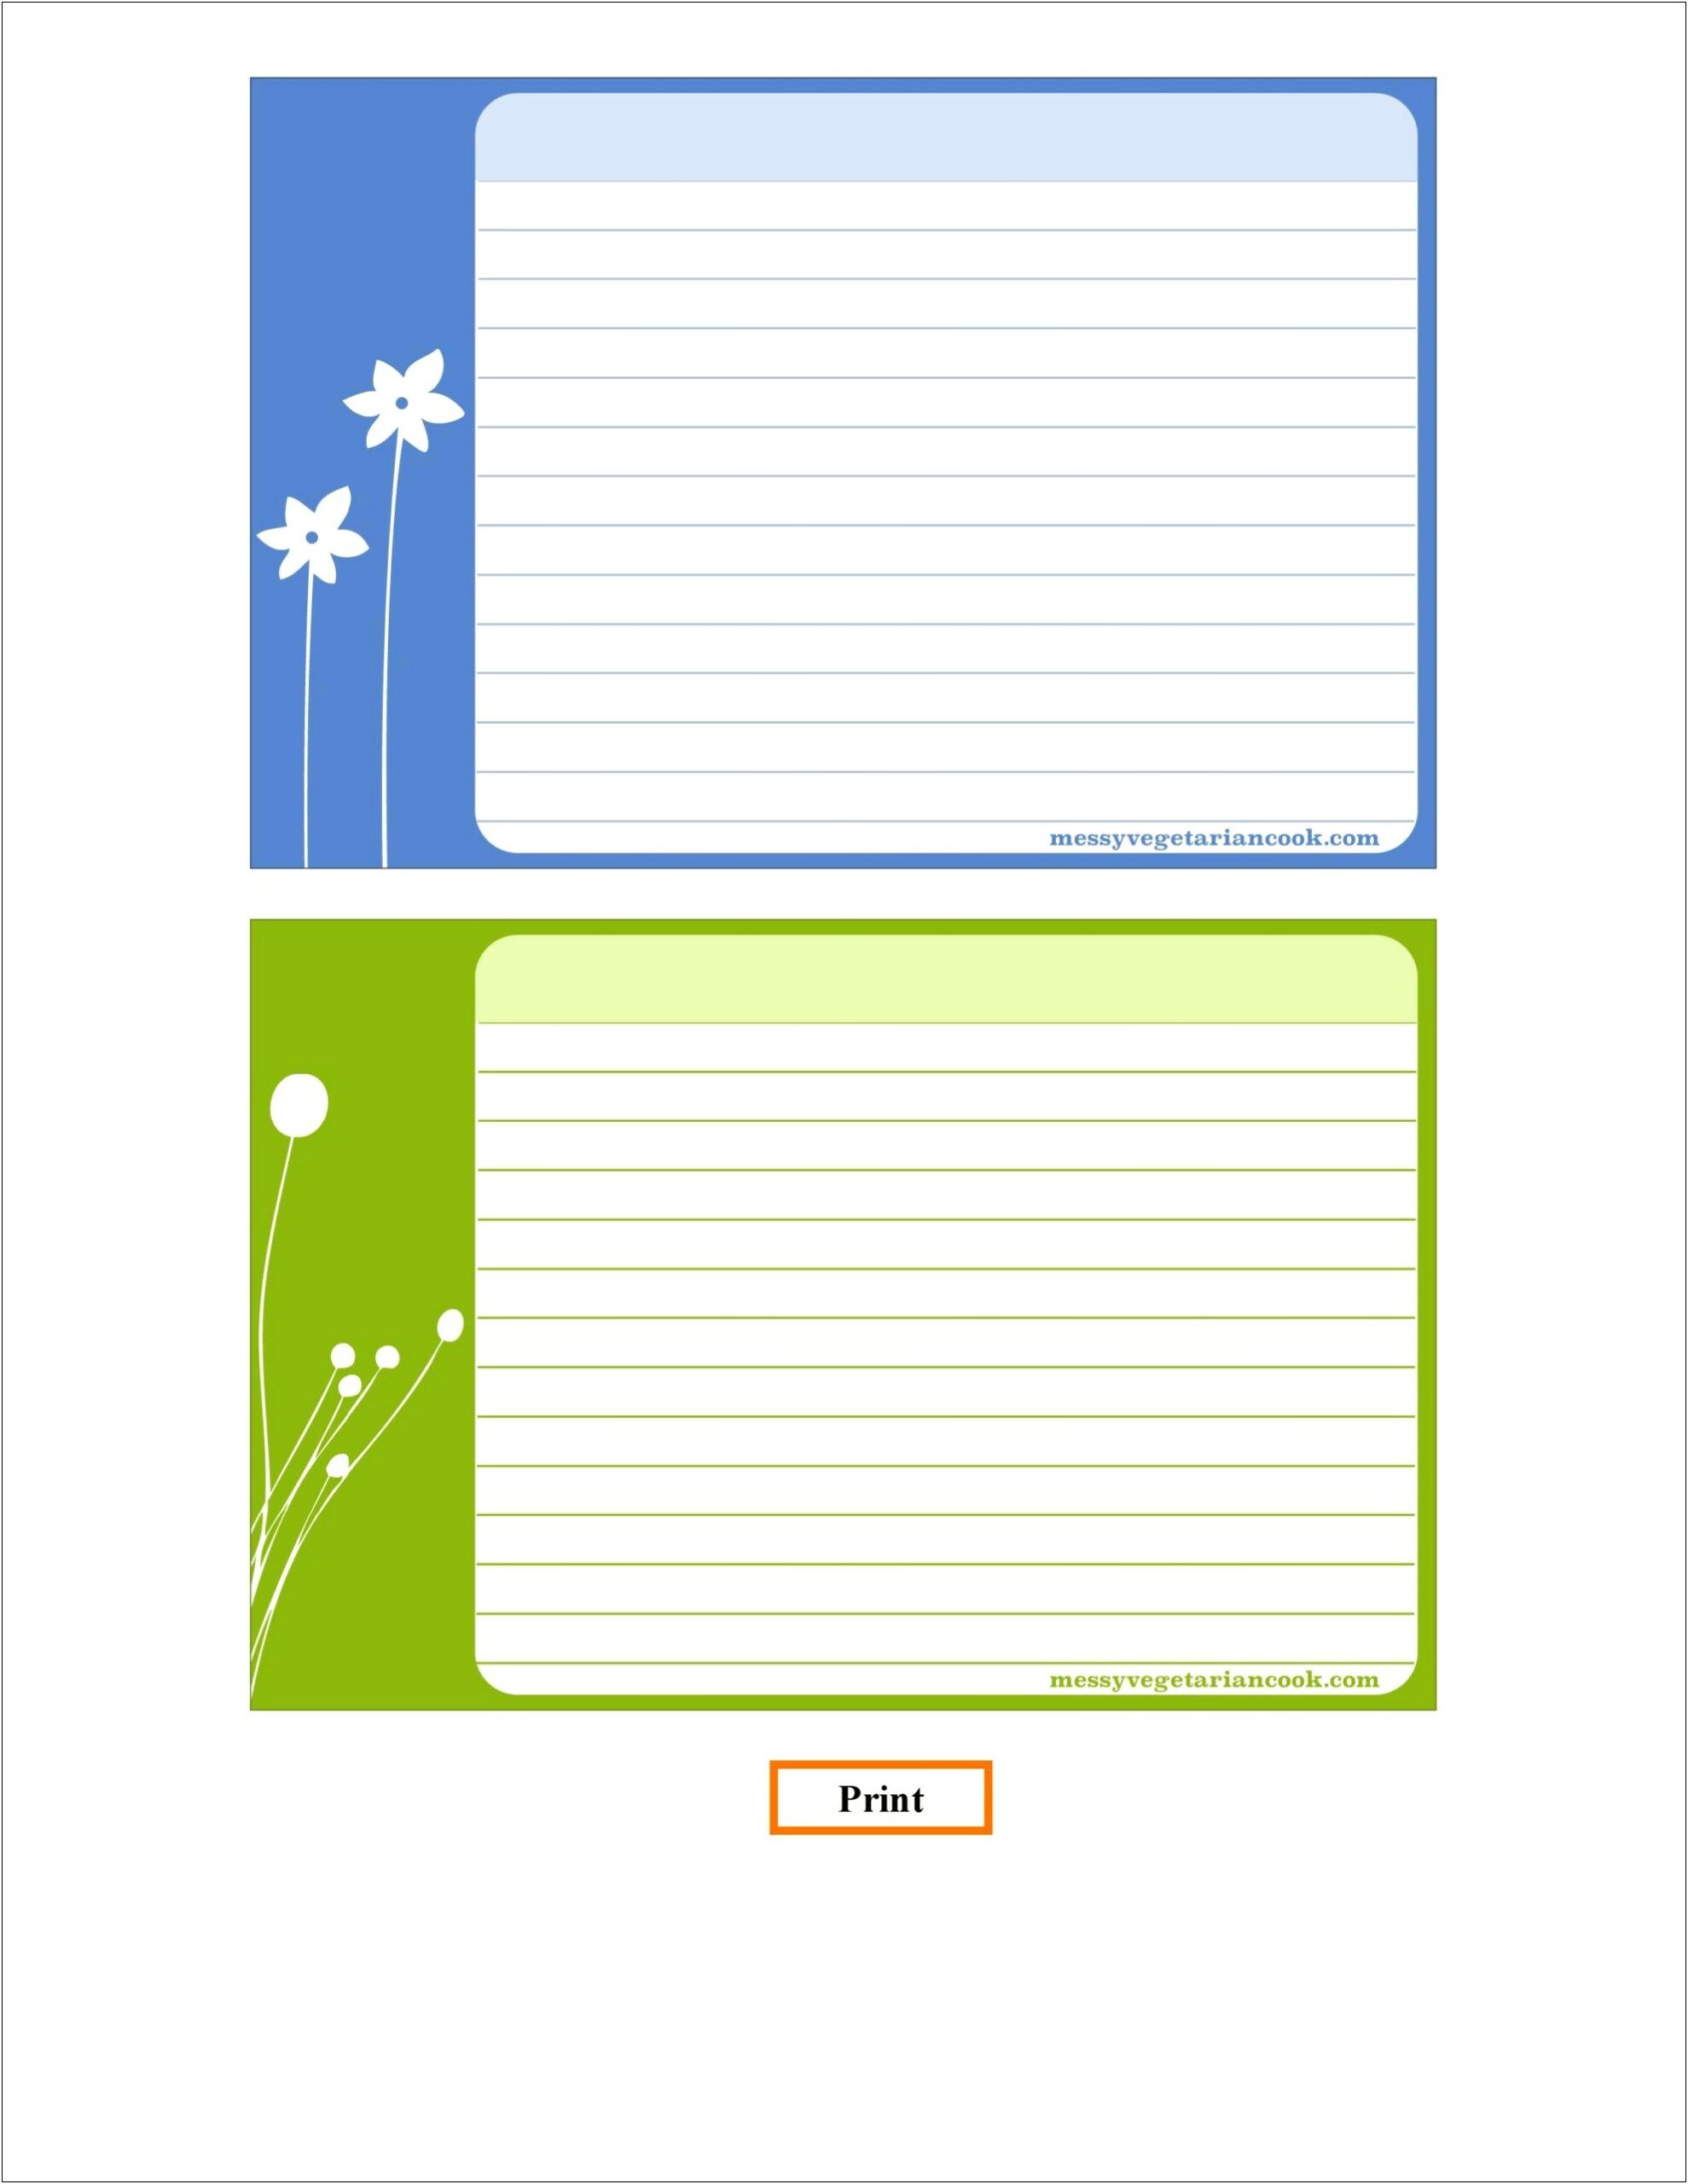 5x7 Recipe Card Template For Word